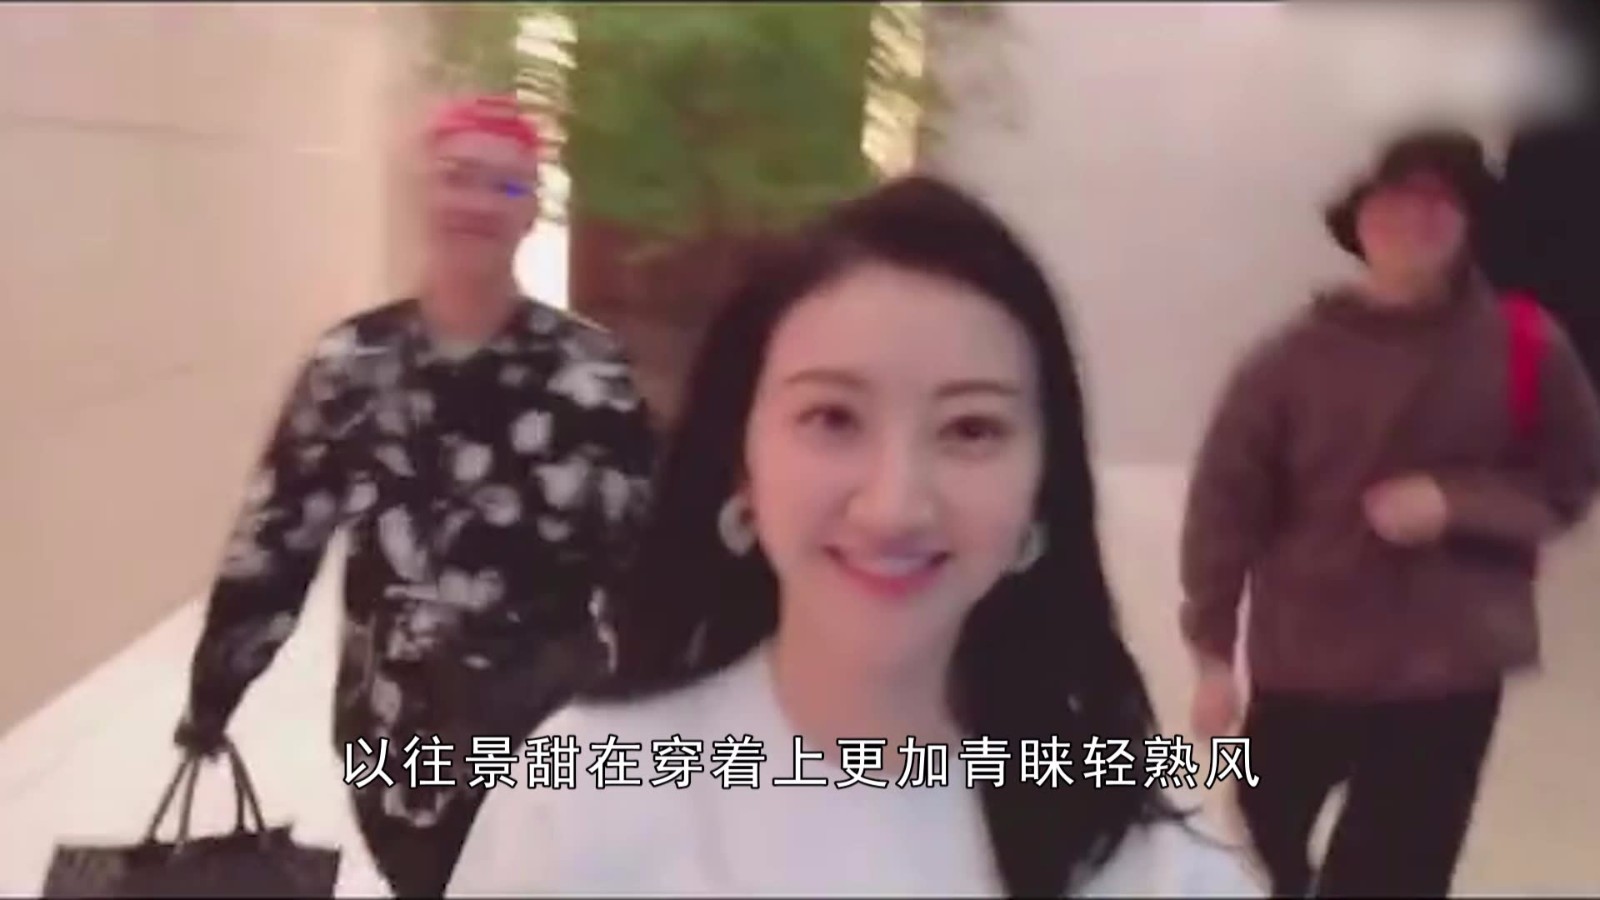 After breaking up with Zhang Jike, Jing Tian, fluorescent green, went shopping, and the little brother of passersby's eyes lit up.